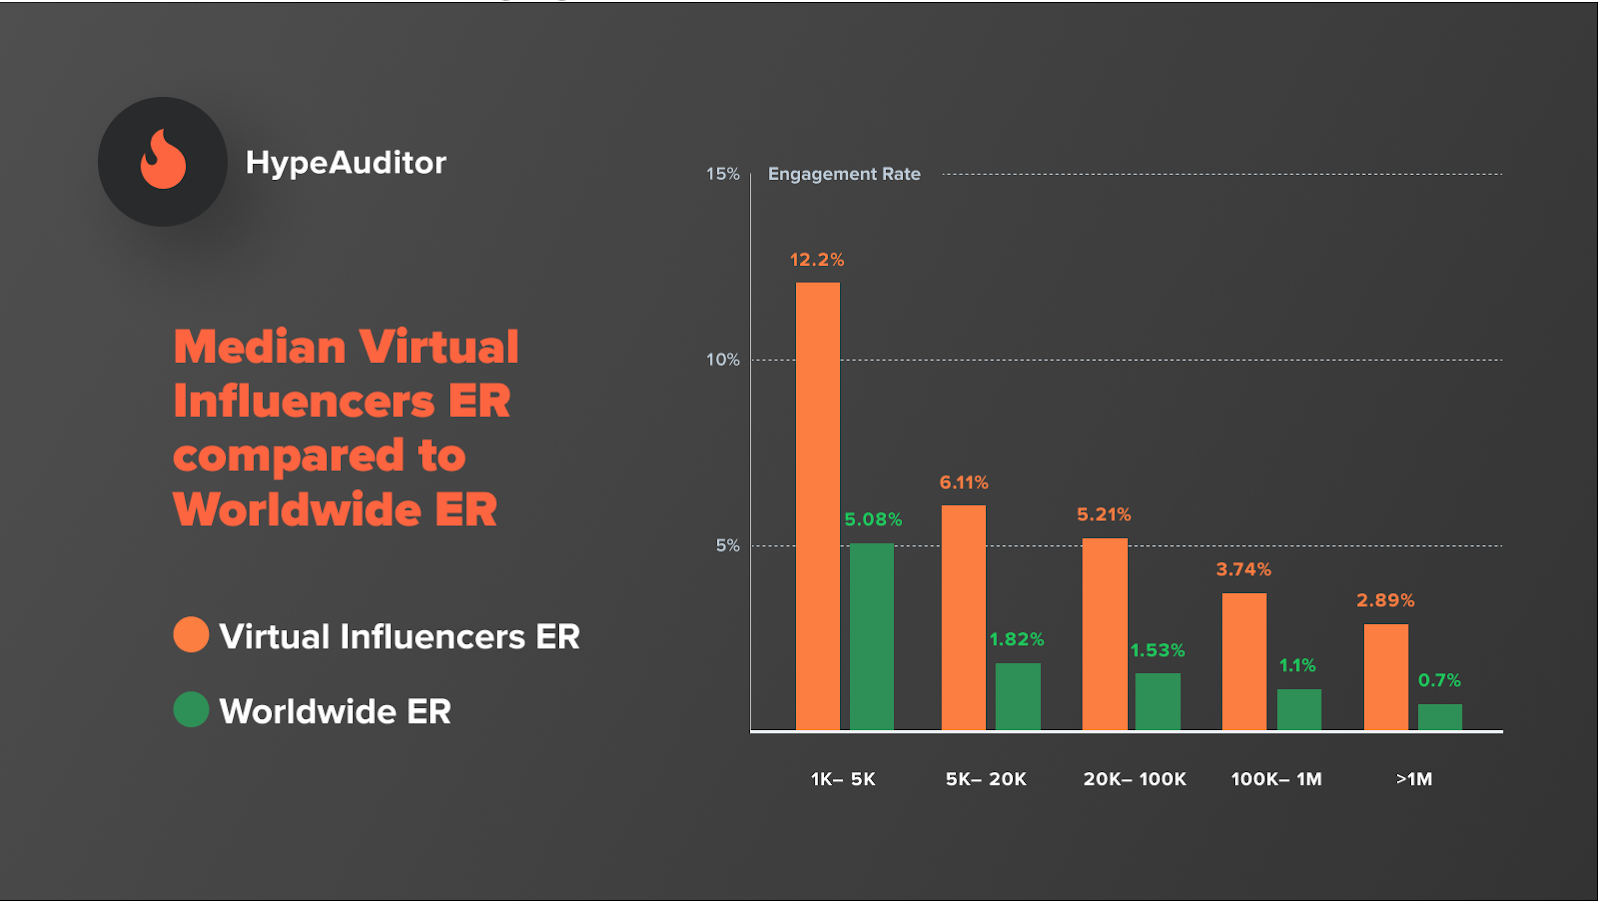 Median Virtual Influencers ER compared to Worldwide ER by Tiers


